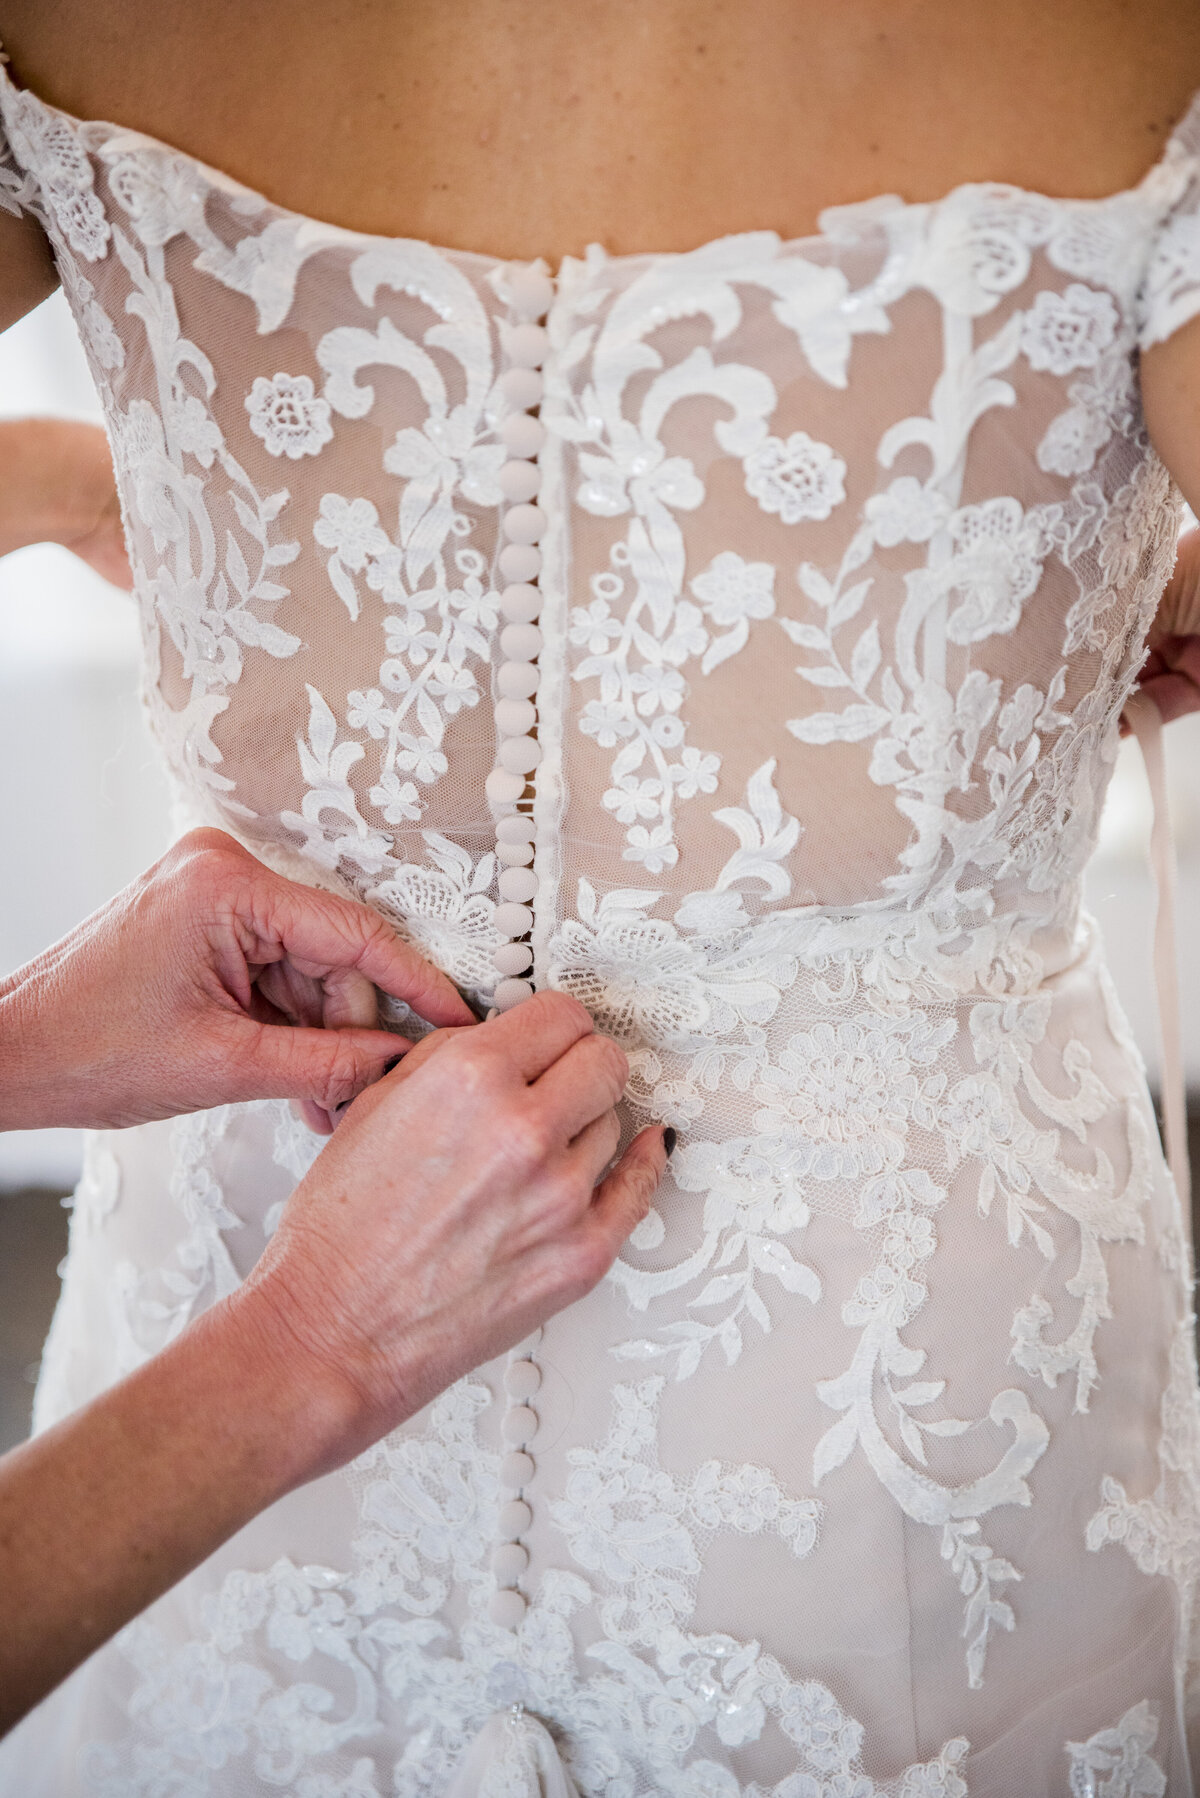 A close up shot of a bridesmaid's hands buttoning a lace wedding gown on the bride.